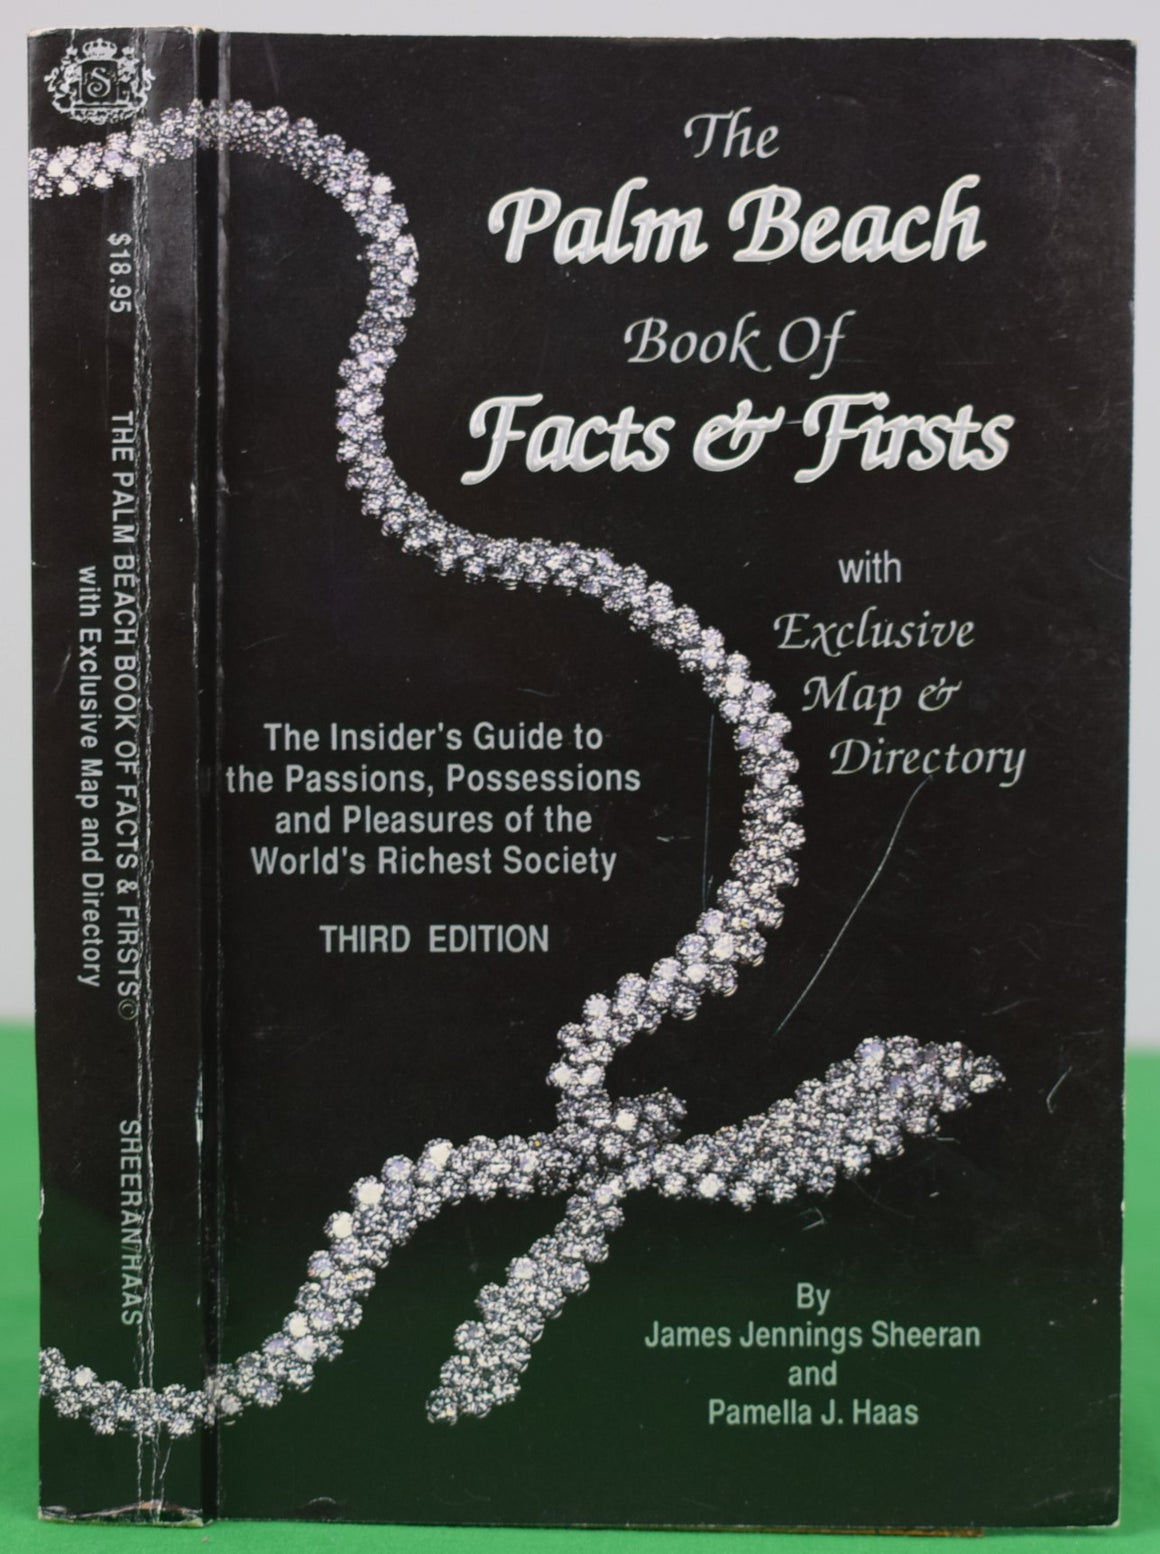 "The Palm Beach Book Of Facts & Firsts" 1991 SHEERAN, James Jennings and HAAS, Pamella J.